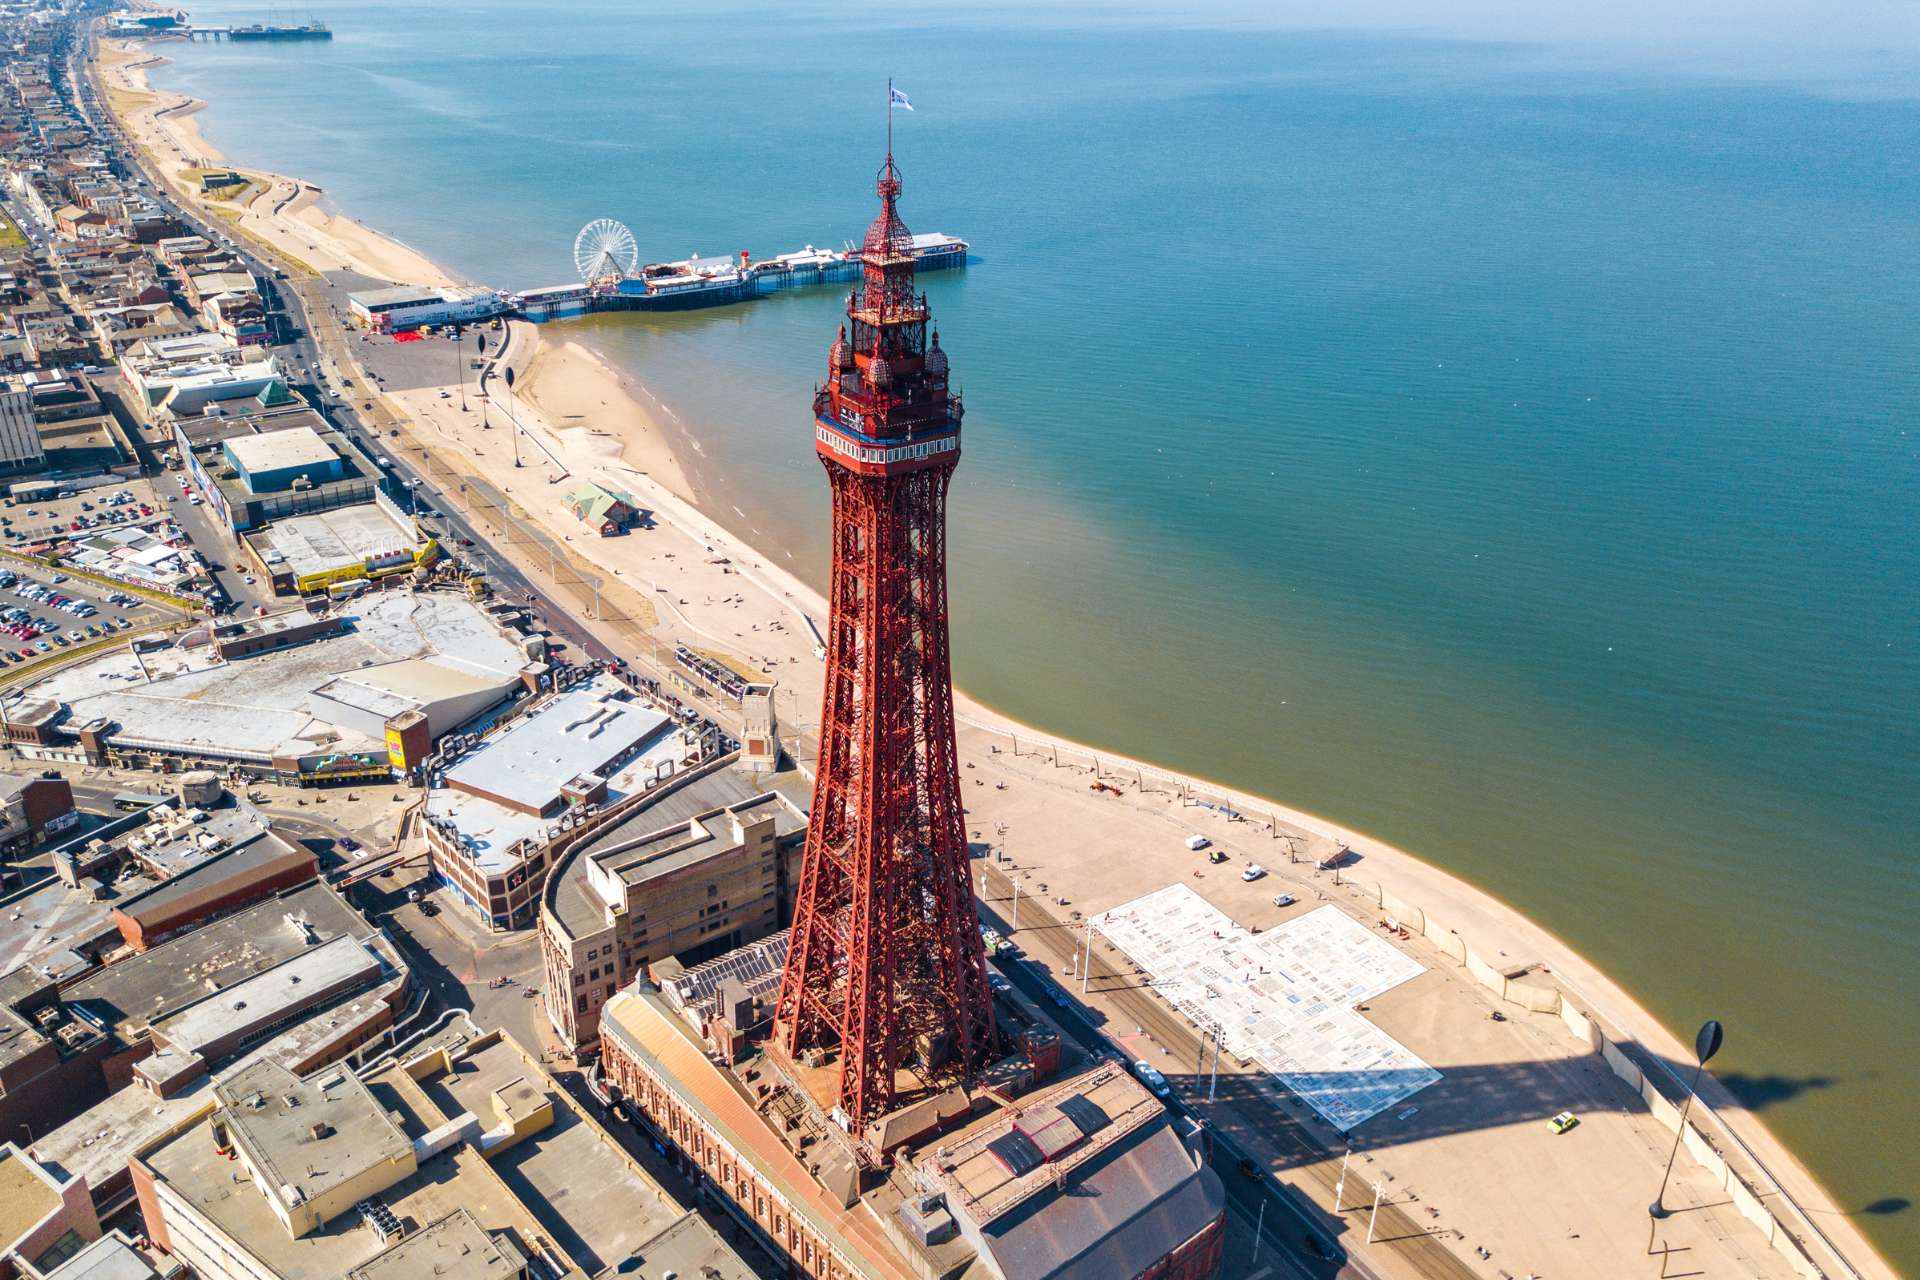 Aerial shot of Blackpool Tower